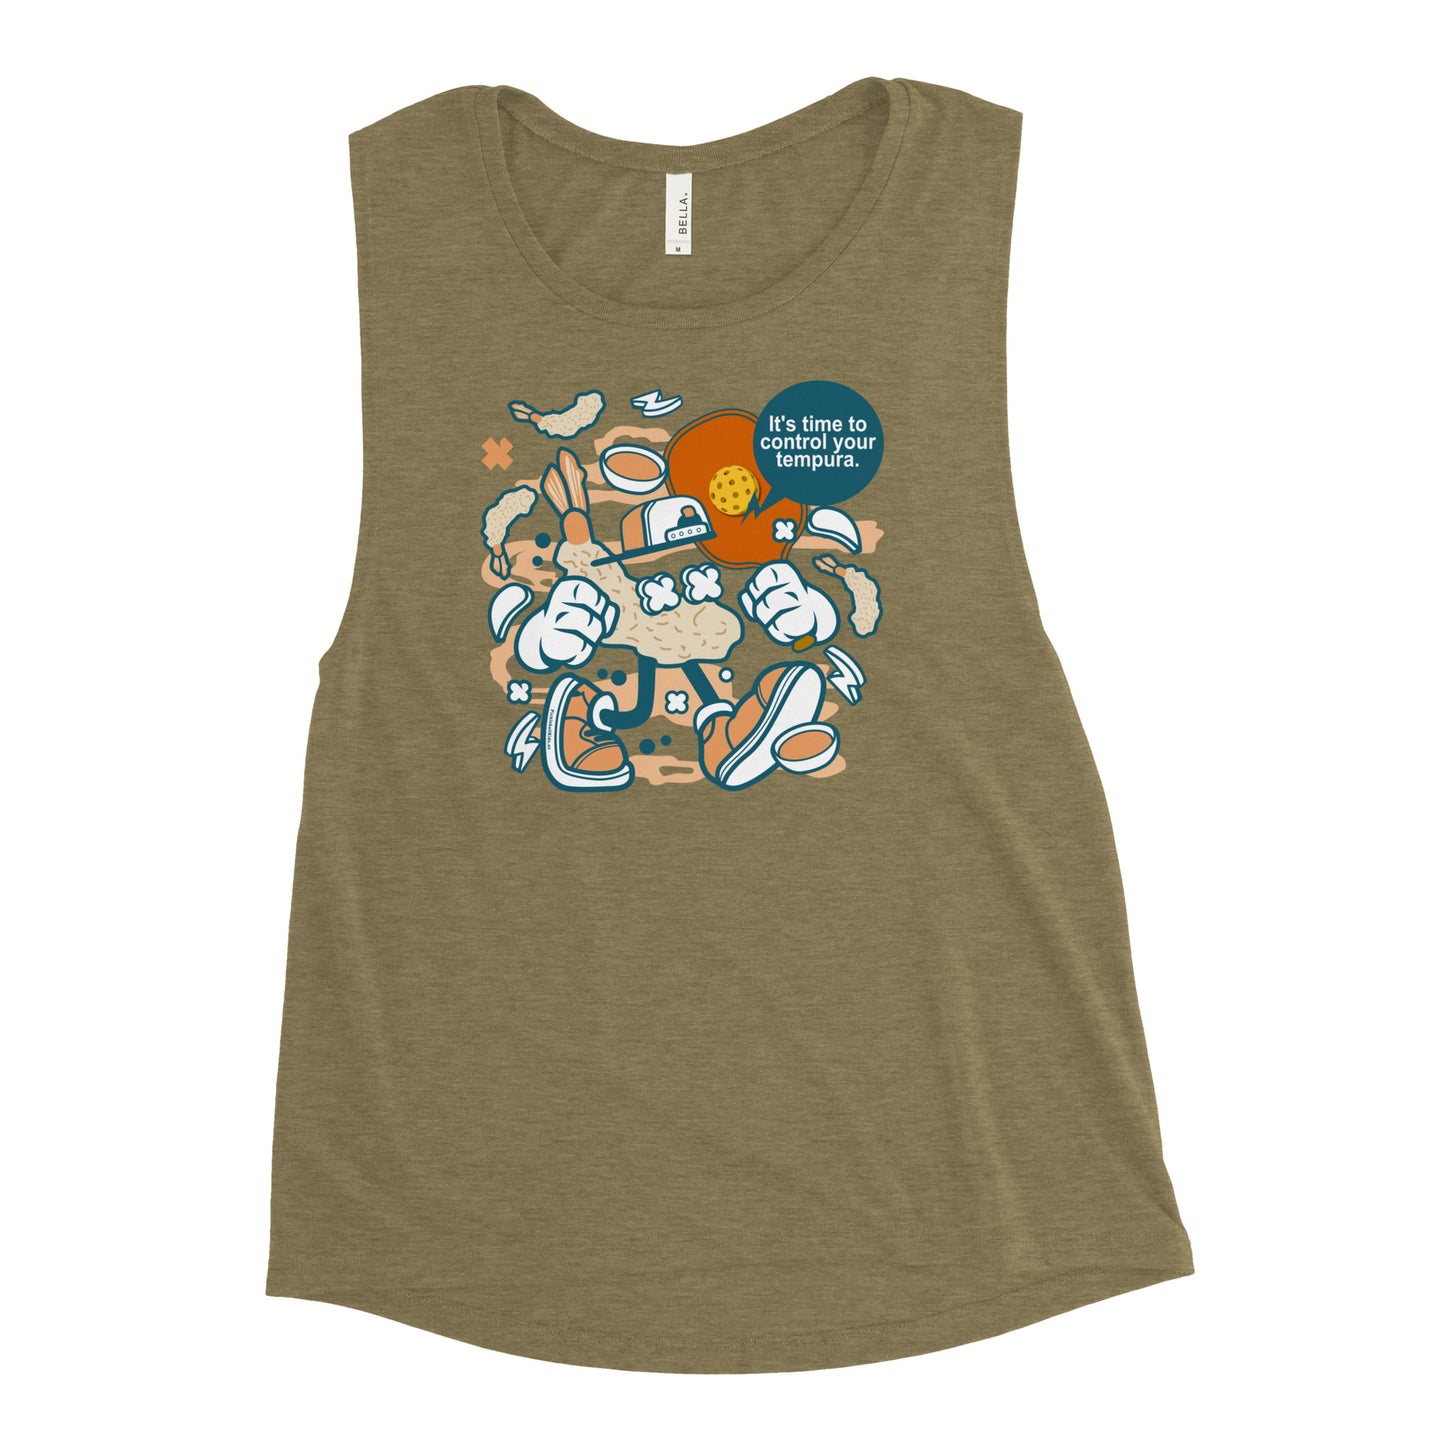 Ladies’  Pickleball Muscle Tank, "It's Time To Control Your Tempura."